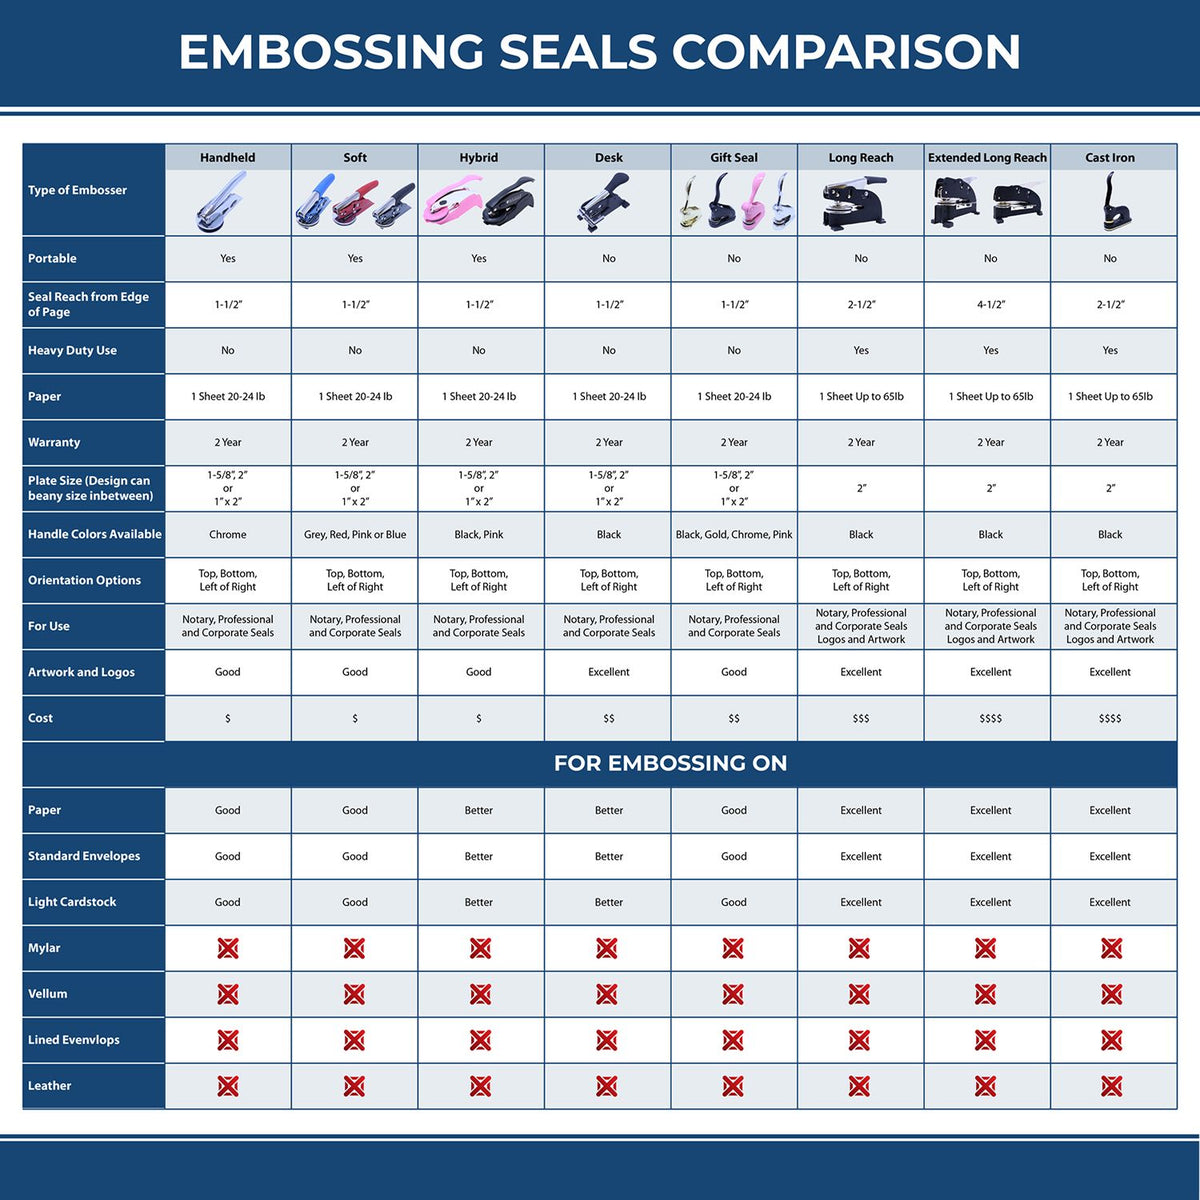 A comparison chart for the different types of mount models available for the Long Reach Wyoming Geology Seal